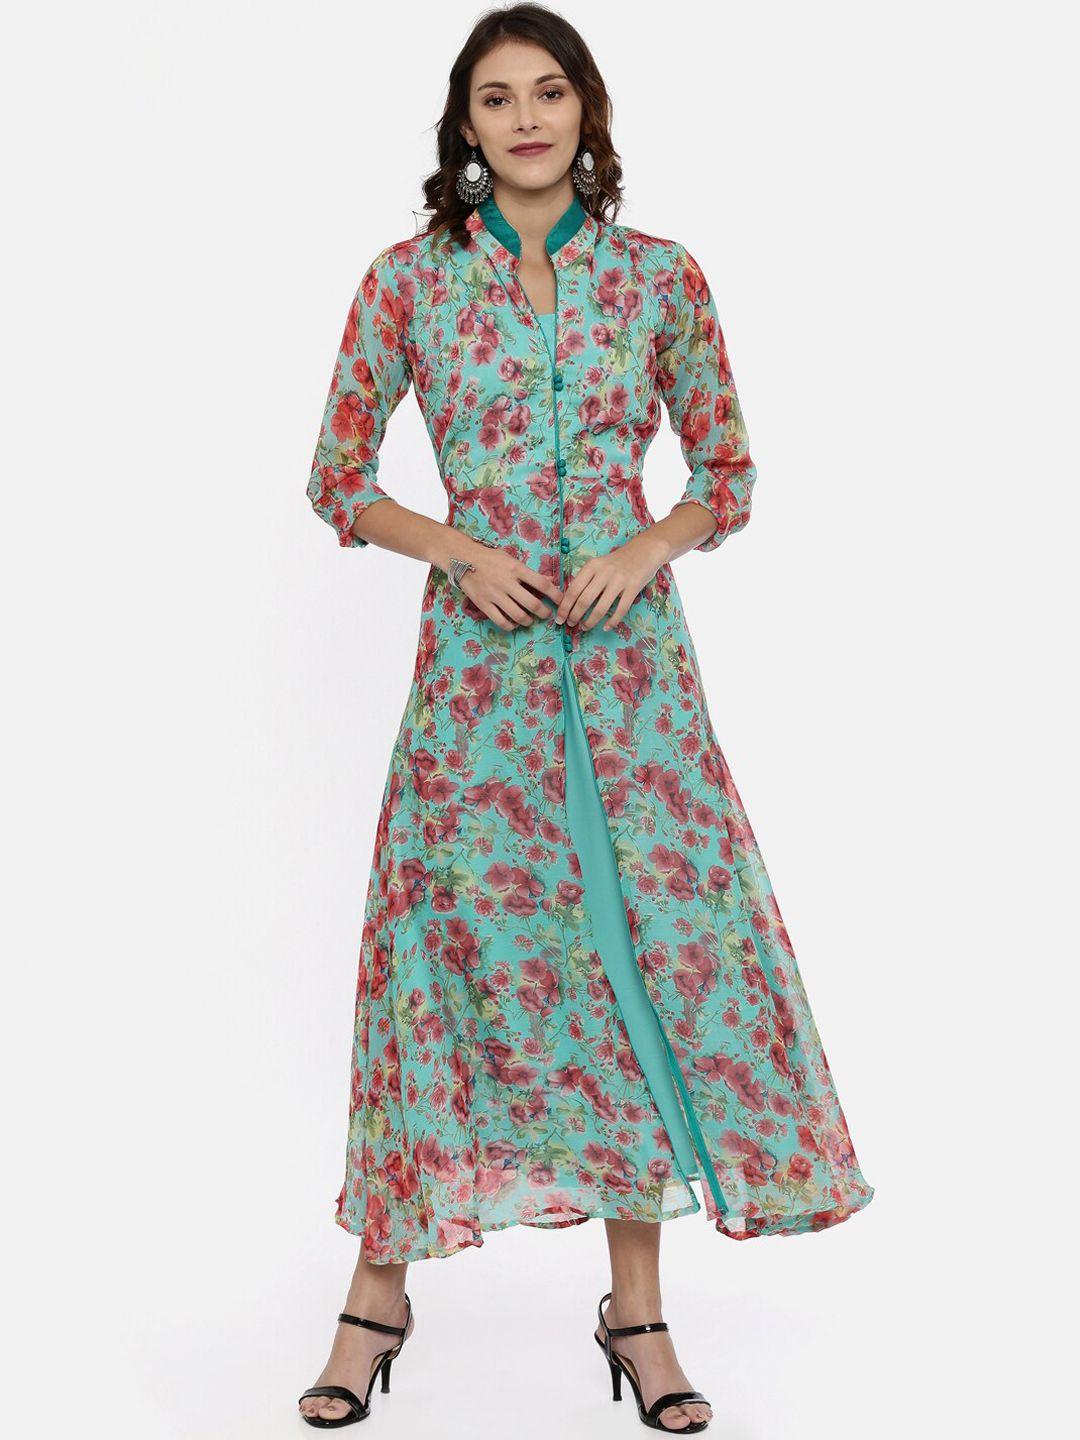 souchii women turquoise blue & pink floral print ethnic maxi dress